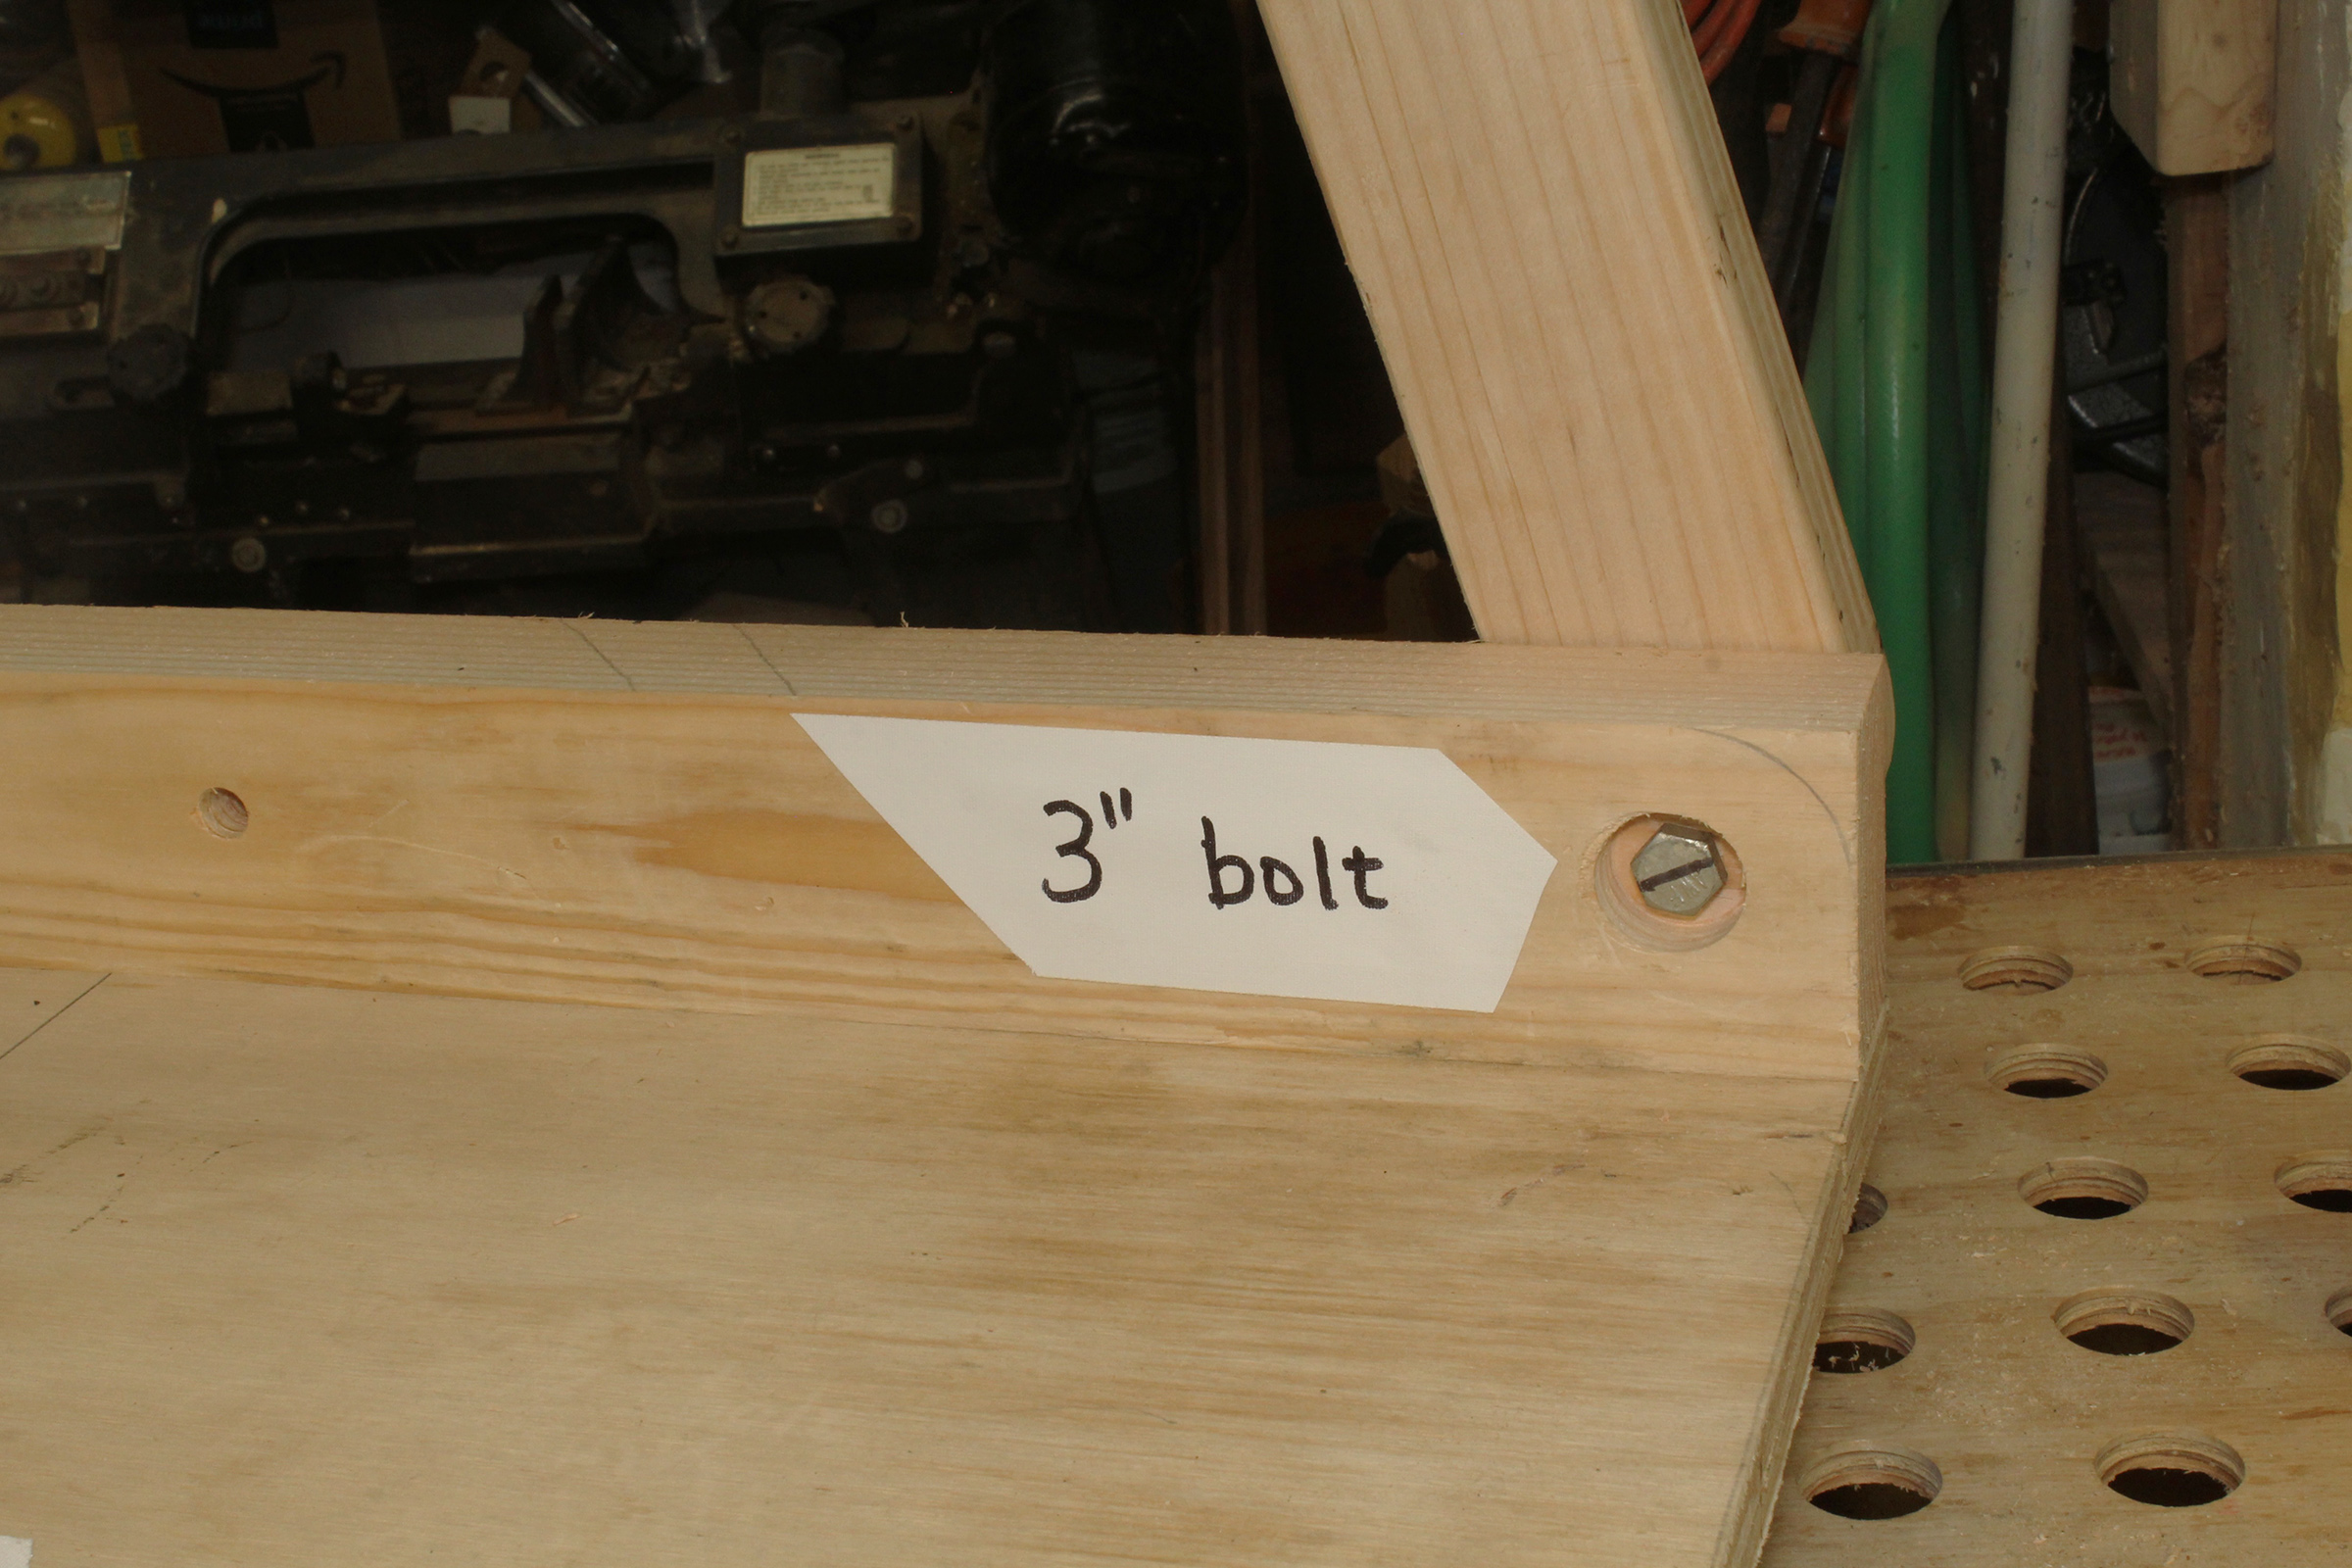 These are the tools you will need to build a wooden bot